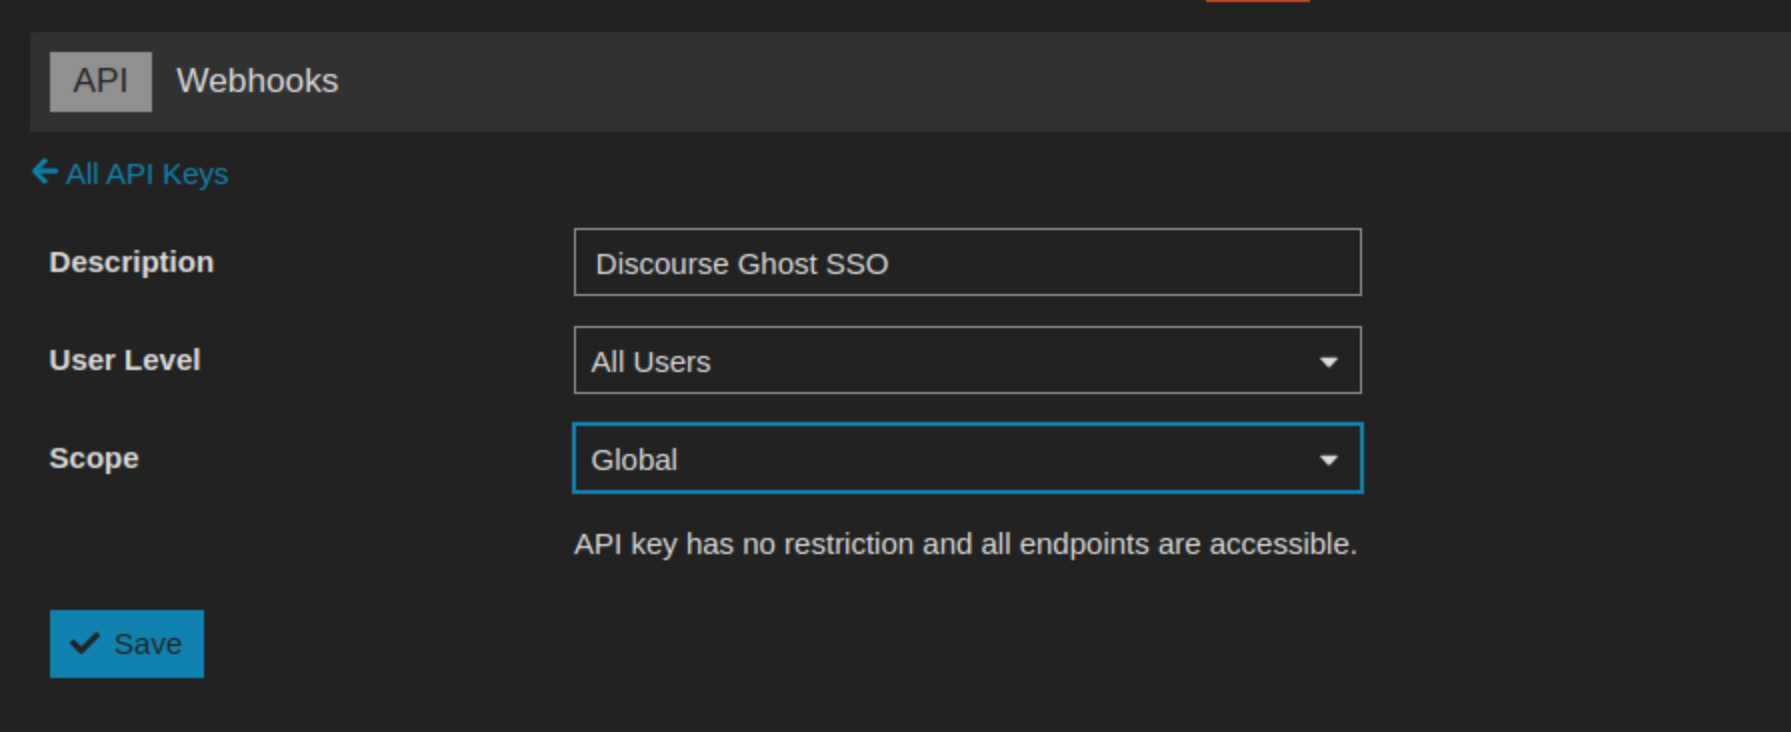 Creating new API in Discourse for Ghost integartion